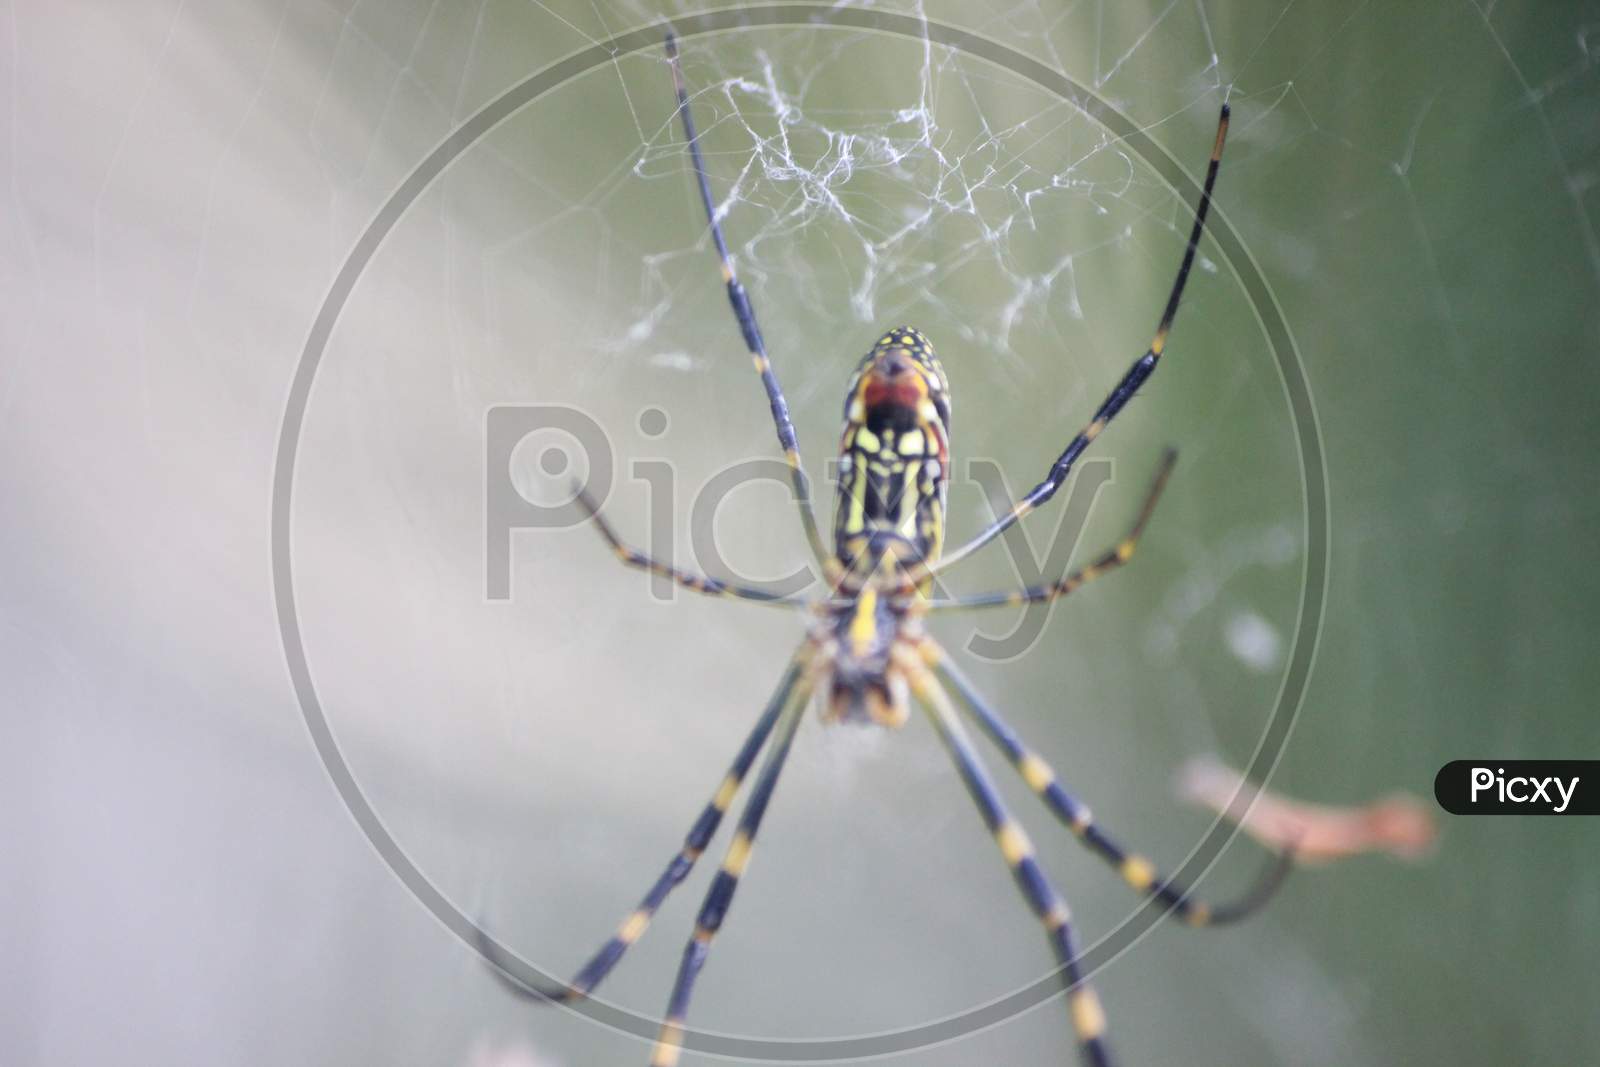 Closeup View With Selective Focus On A Giant Spider And Spider Webs